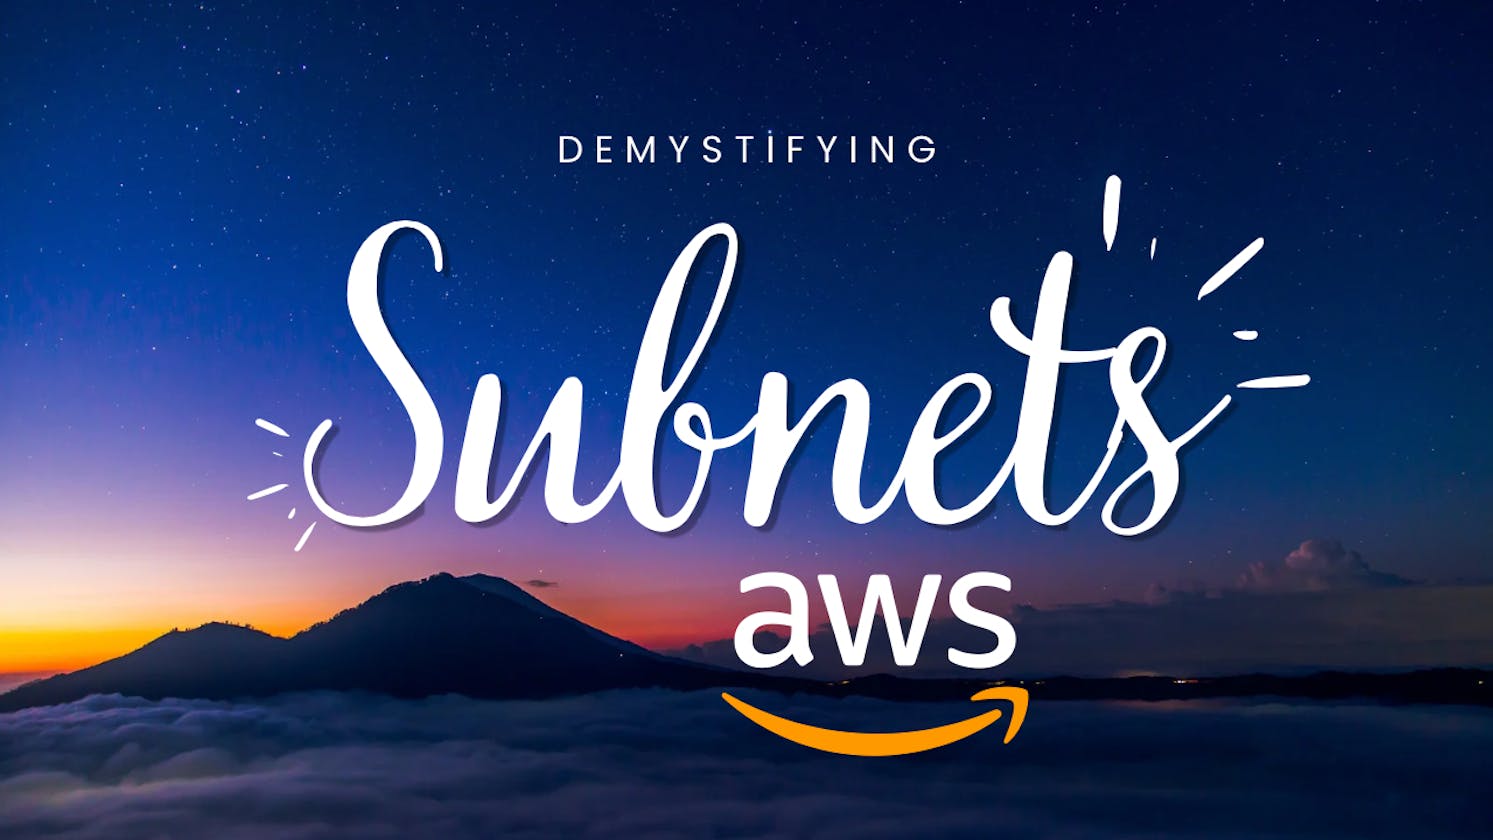 Demystifying subnets in AWS